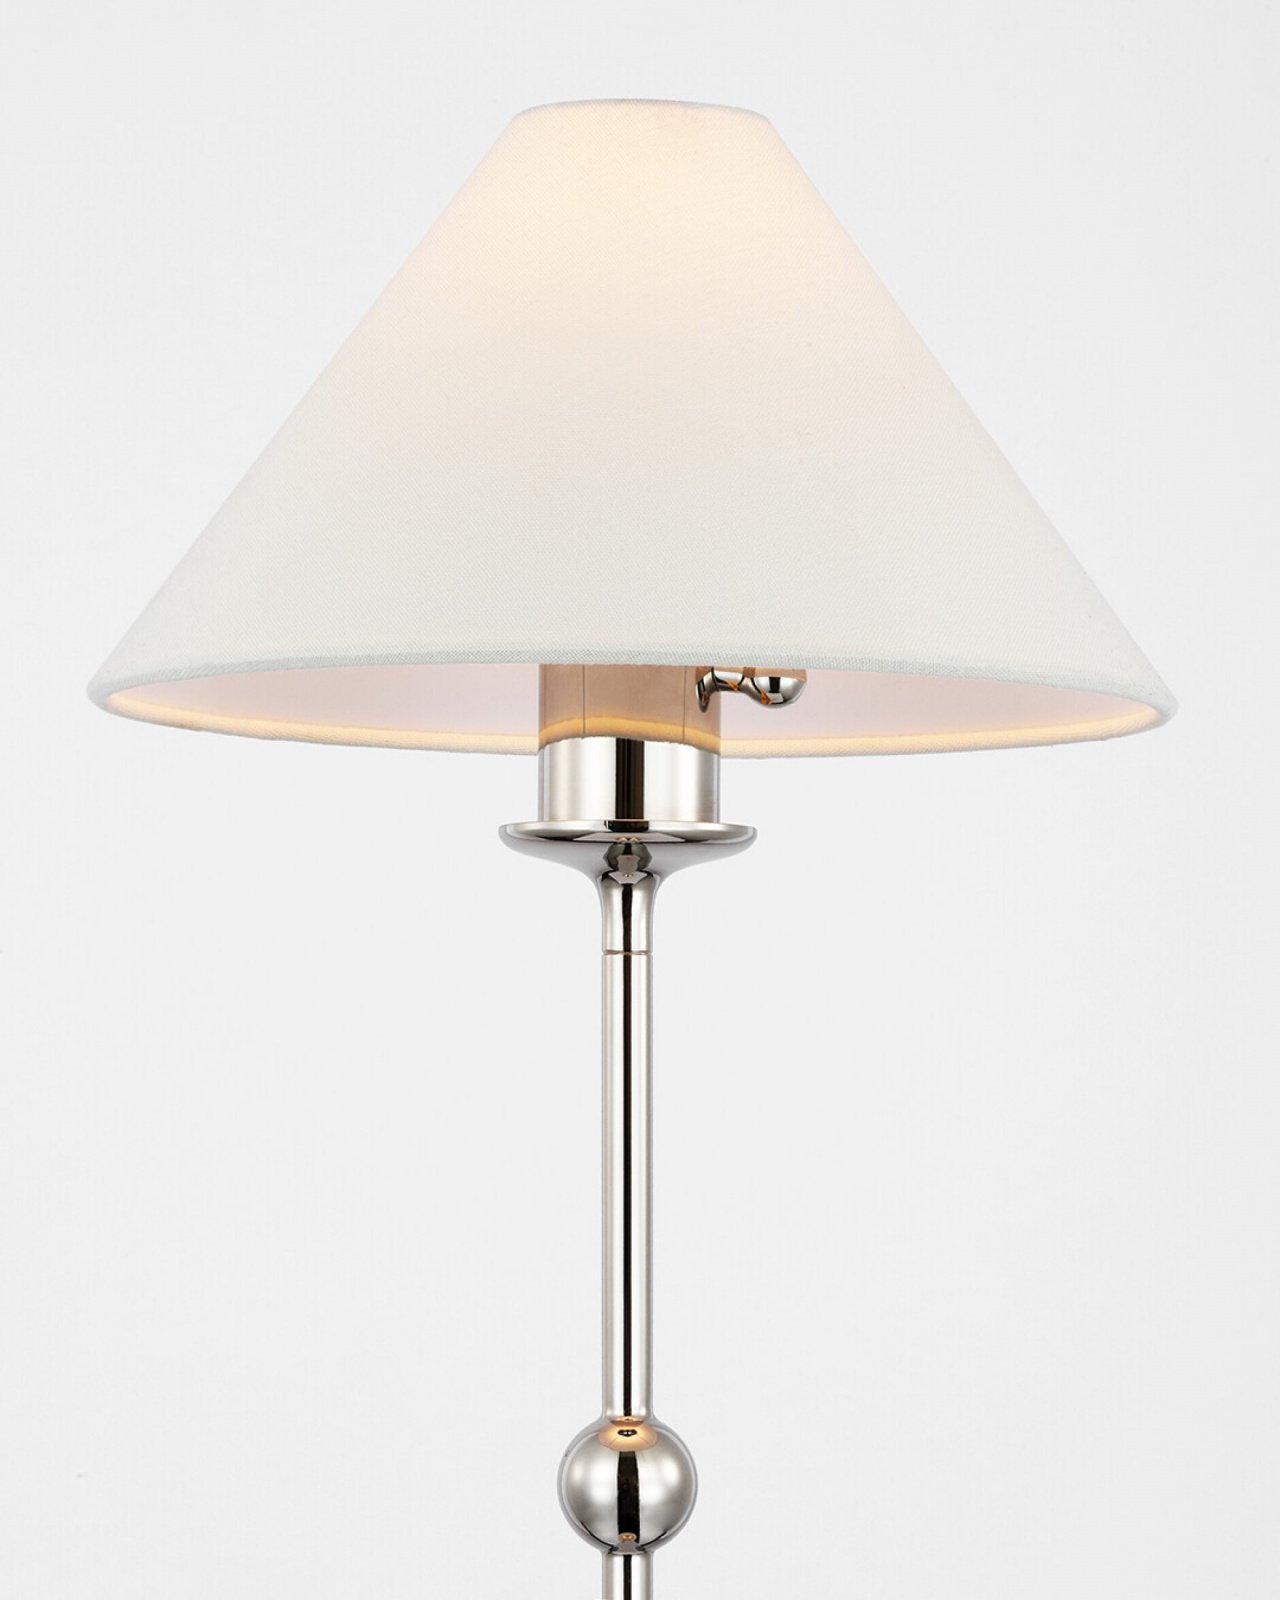 Caspian Accent Lamp Polished Nickel and Alabaster/Linen Medium